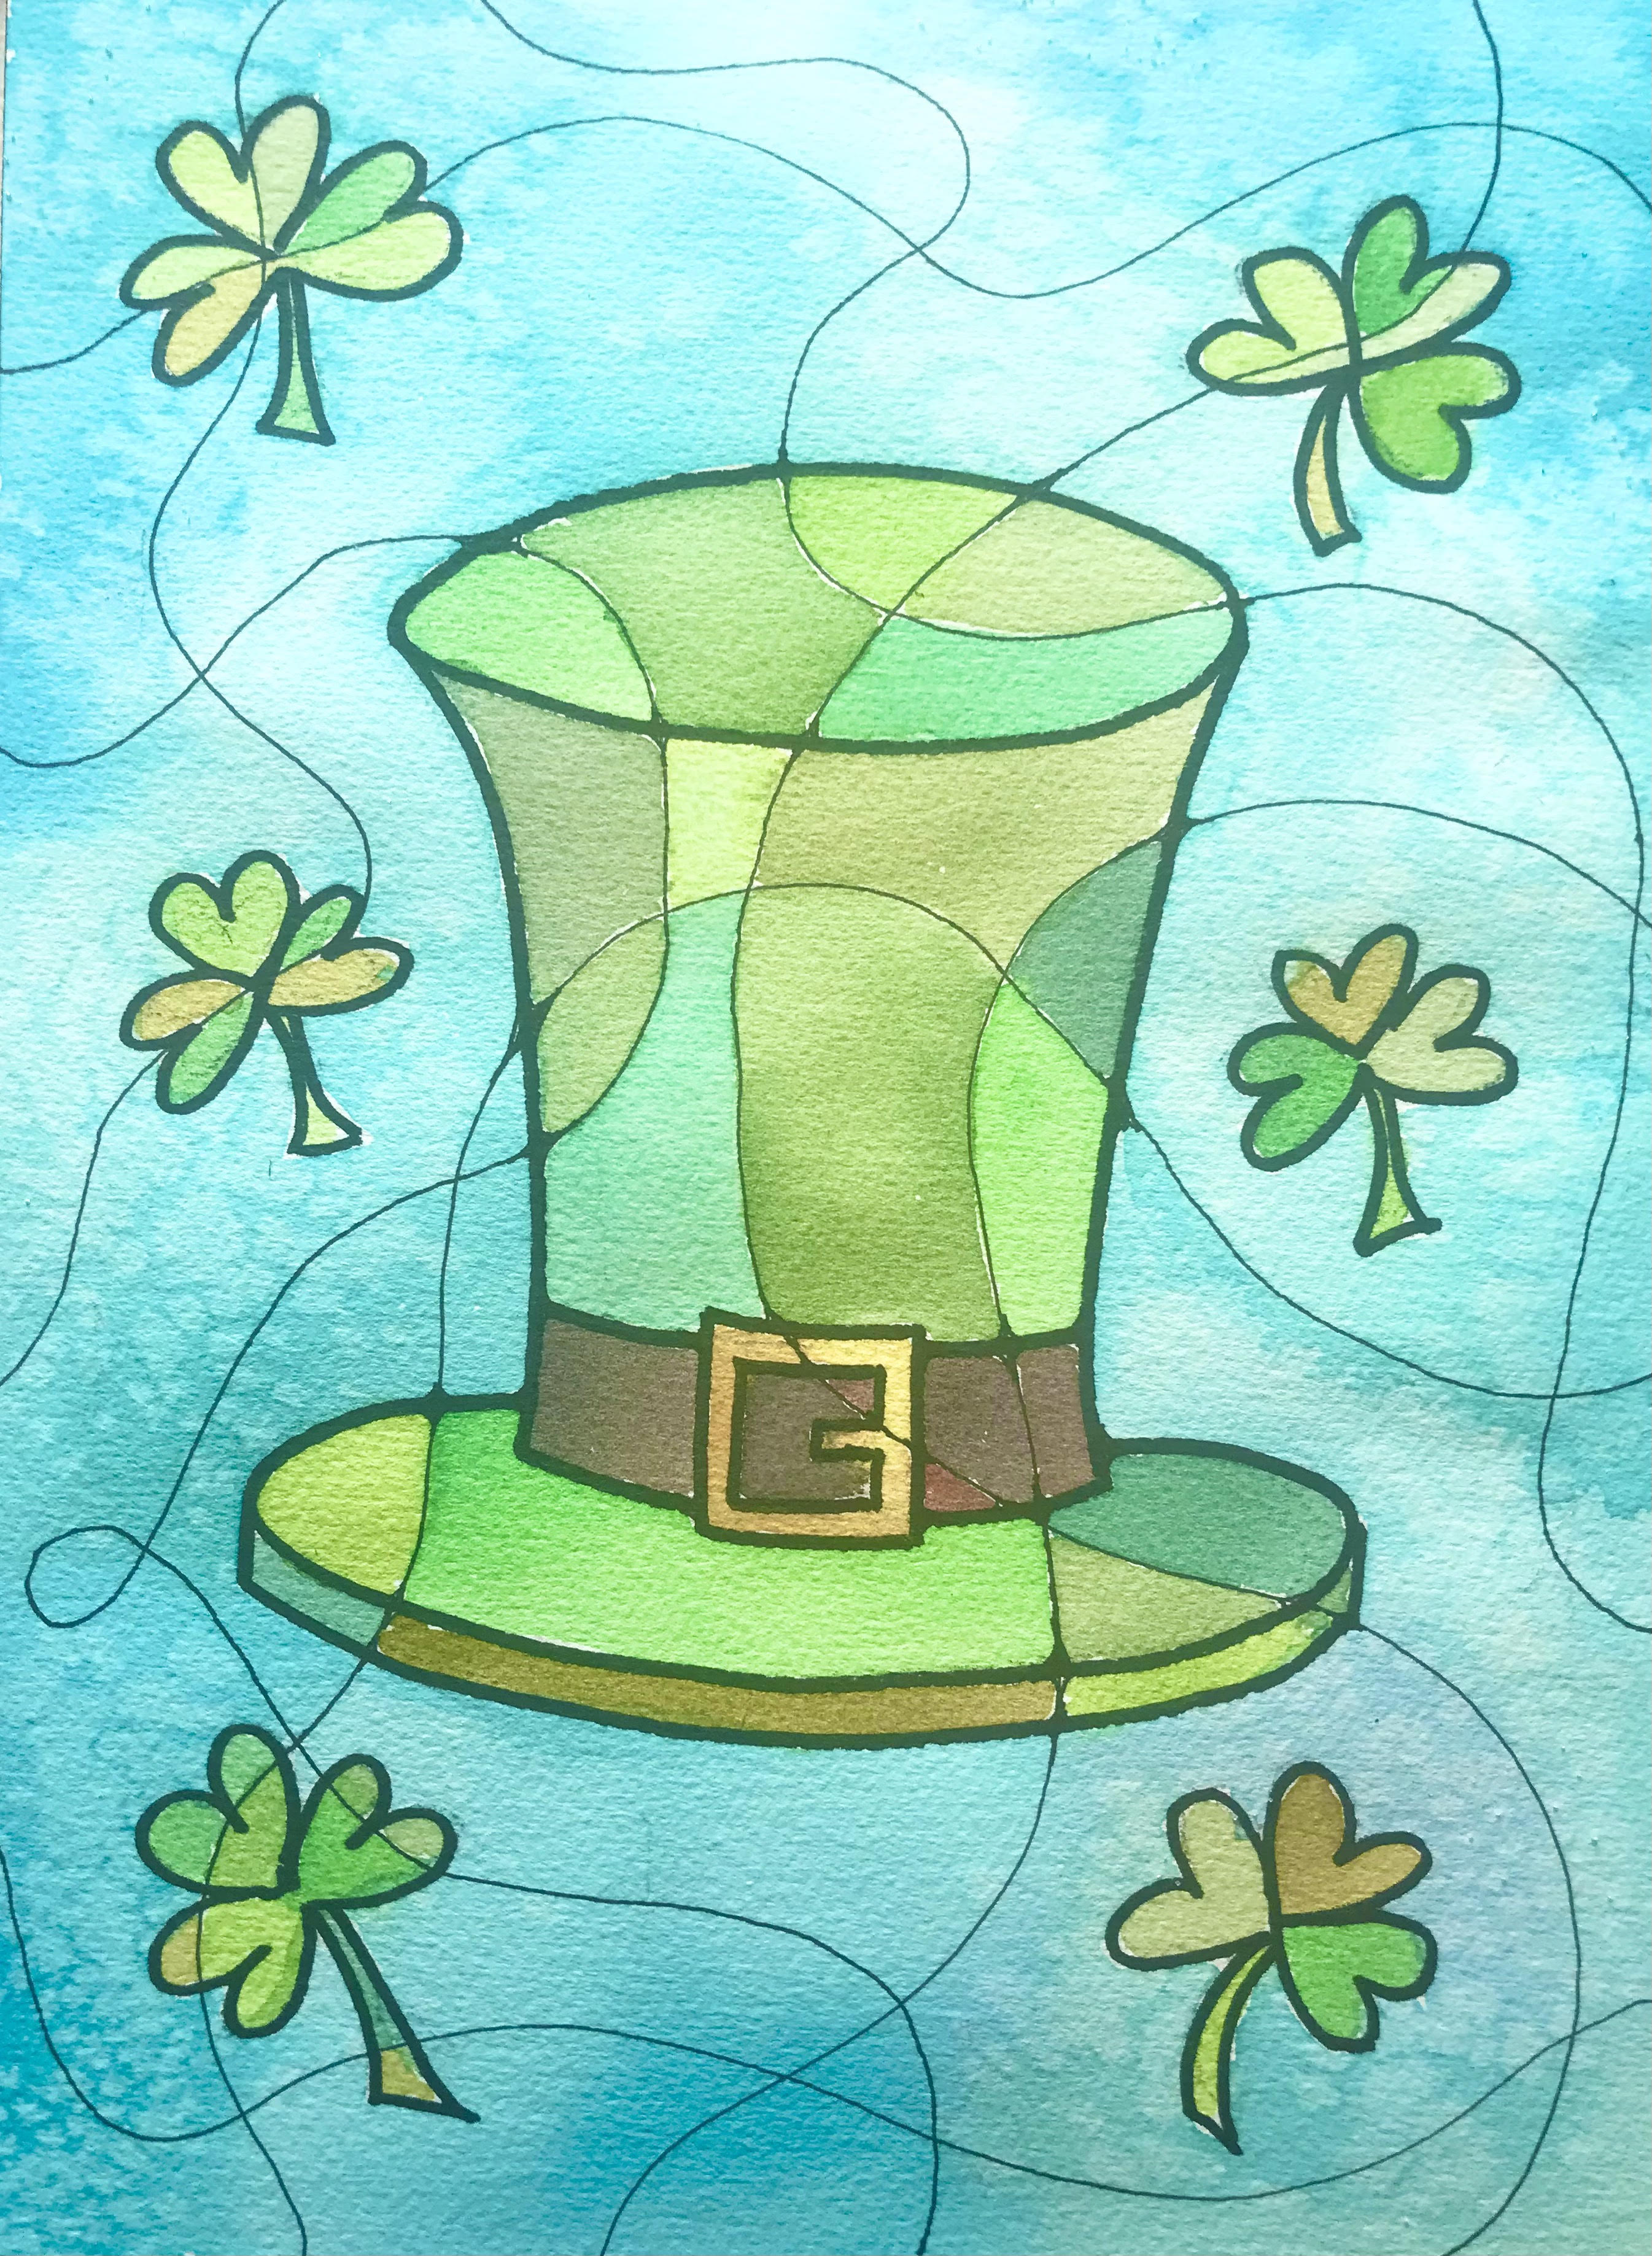 Watercolor painting of a green leprechaun hat and shamrocks on a blue background